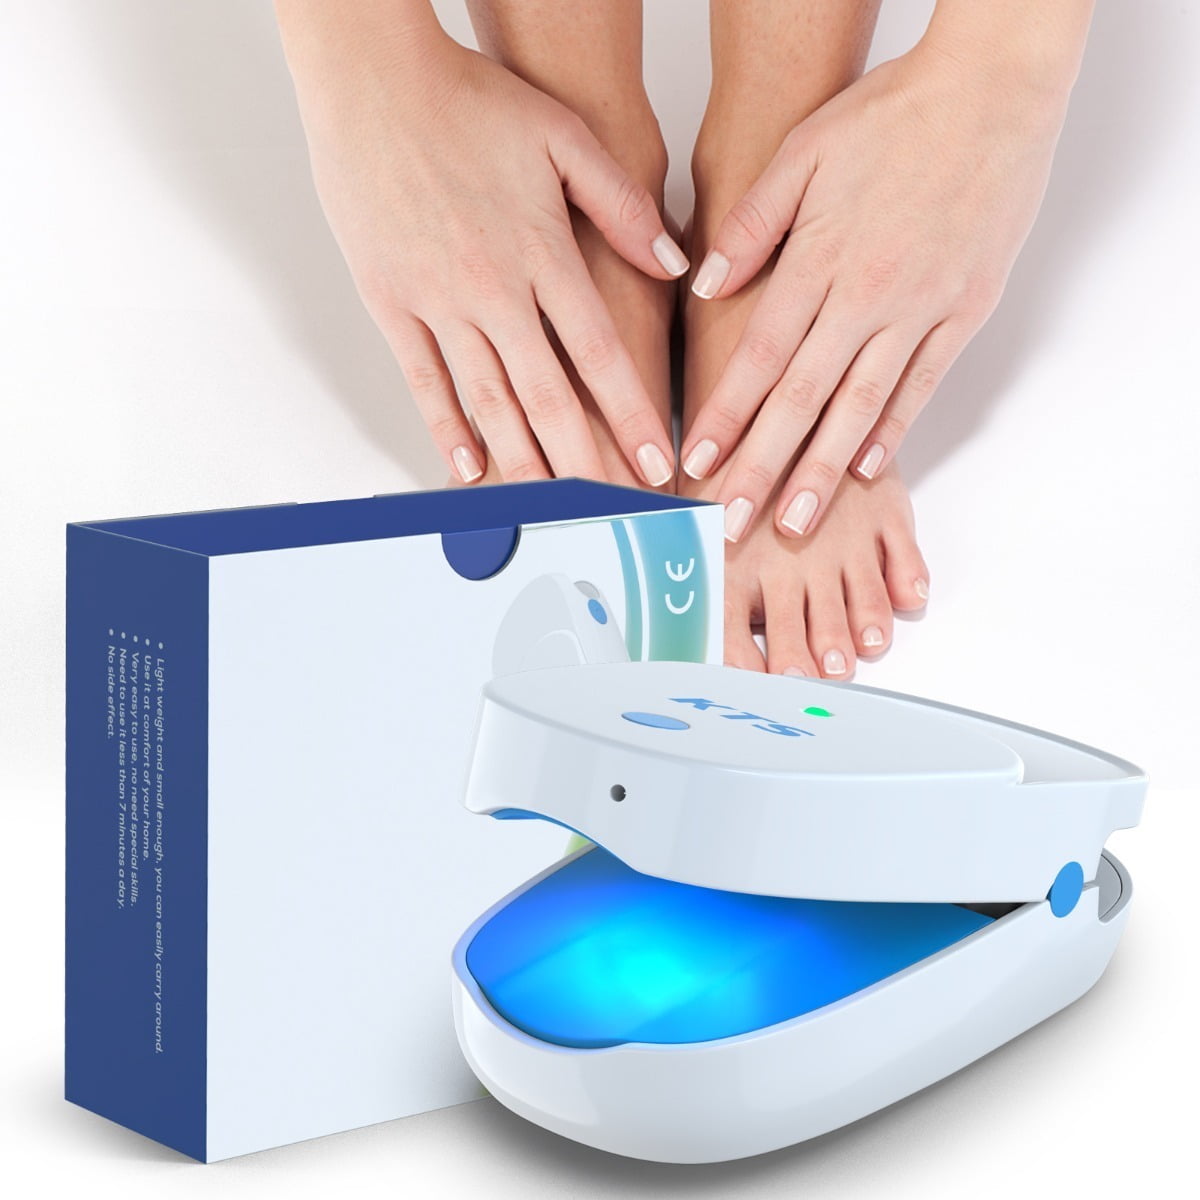 Yiget Nail Fungus Cleaning Device for Toenail Fungus and Onychomycosis ...